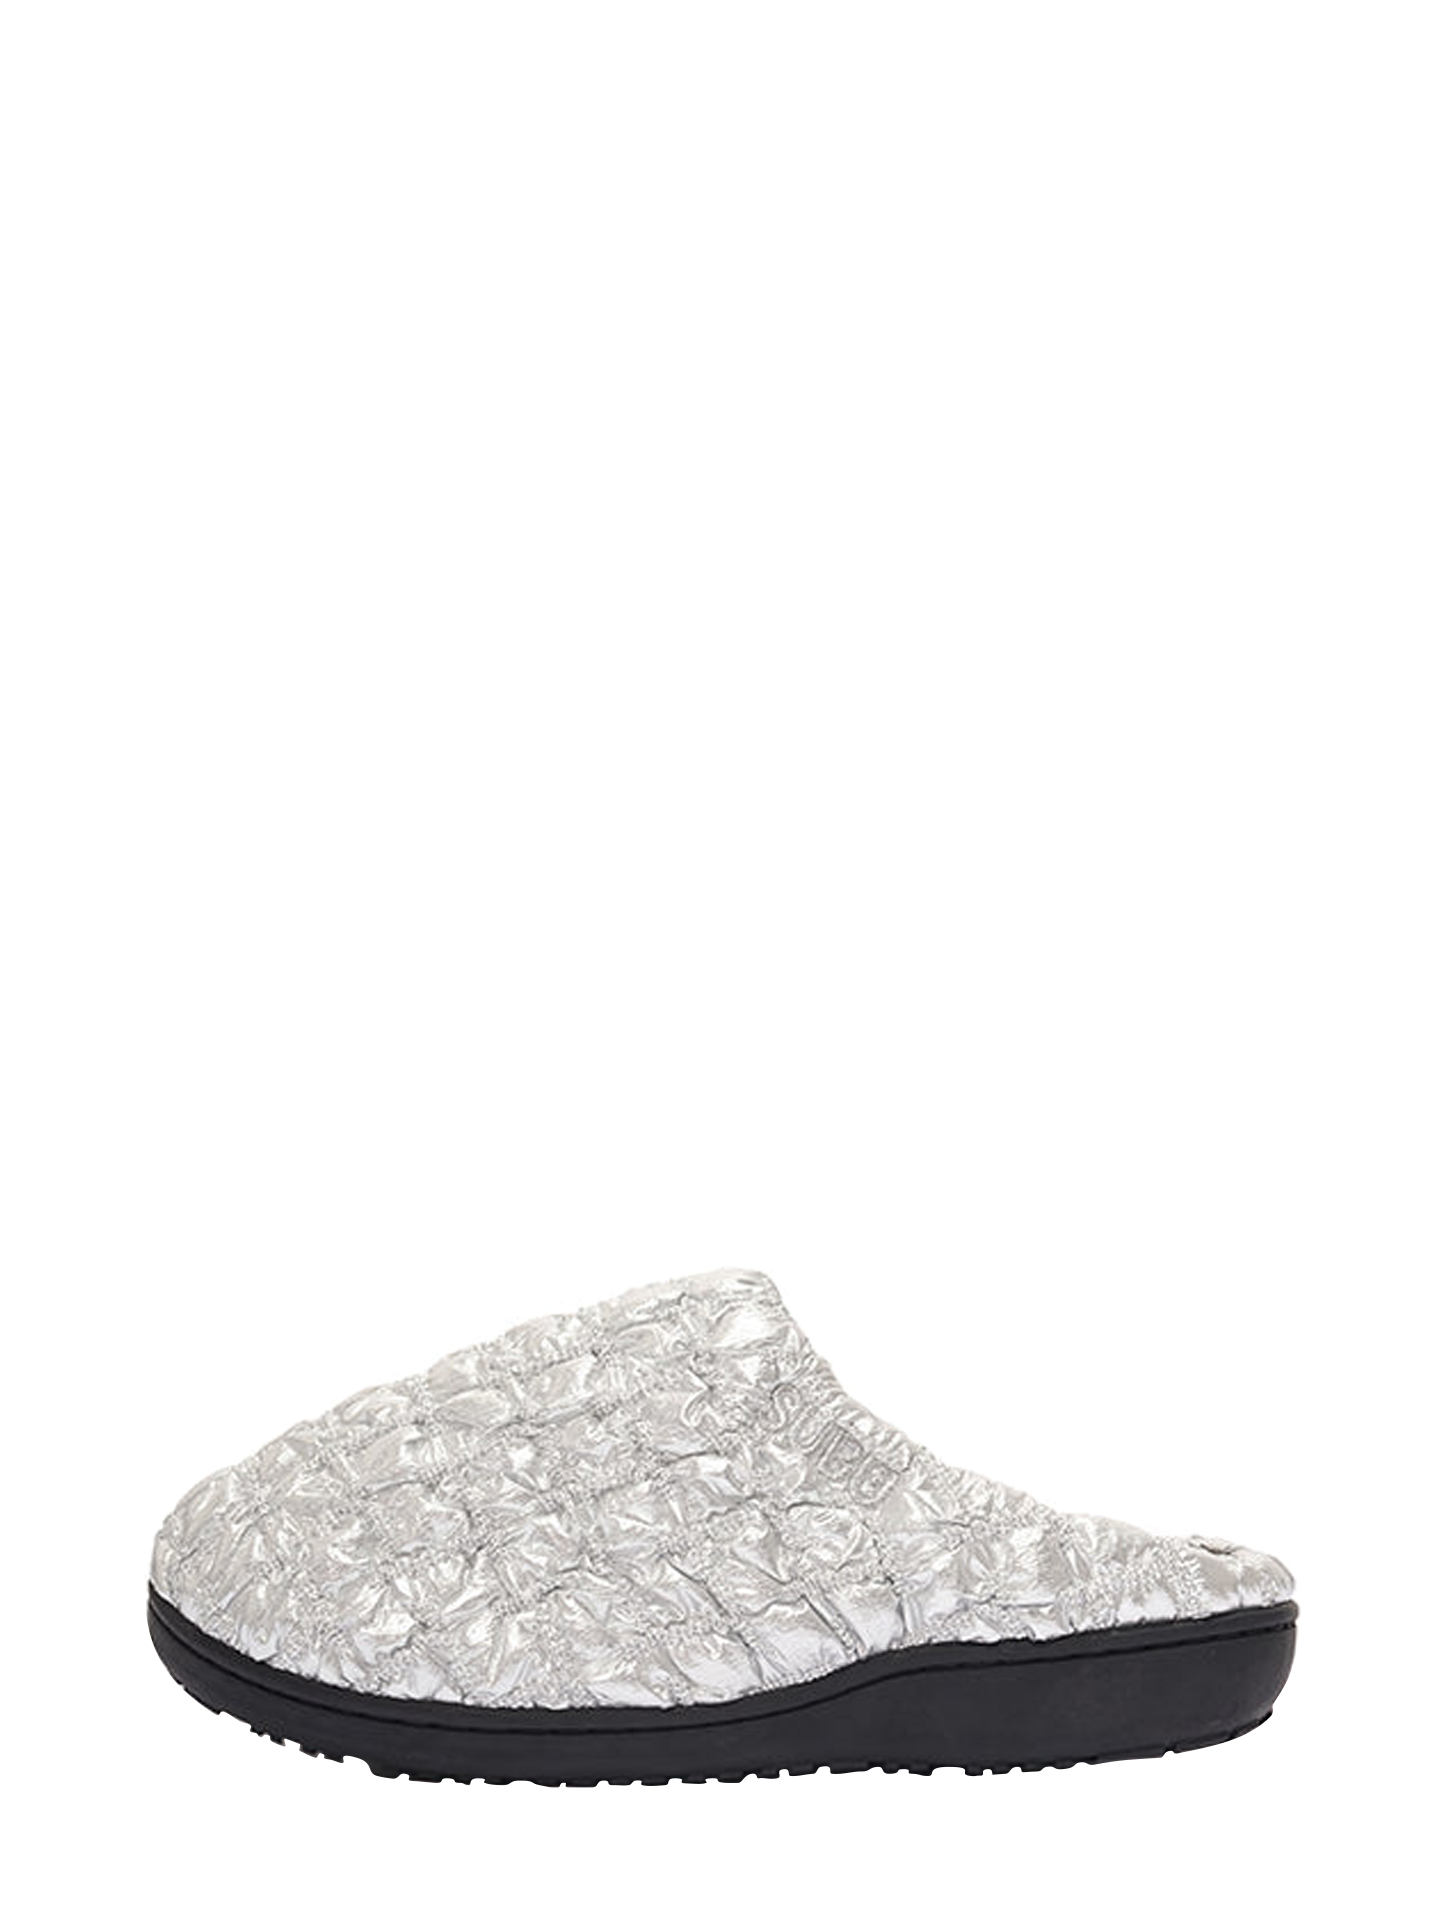 Subu Concept Bumpy Silver Puffer Slippers